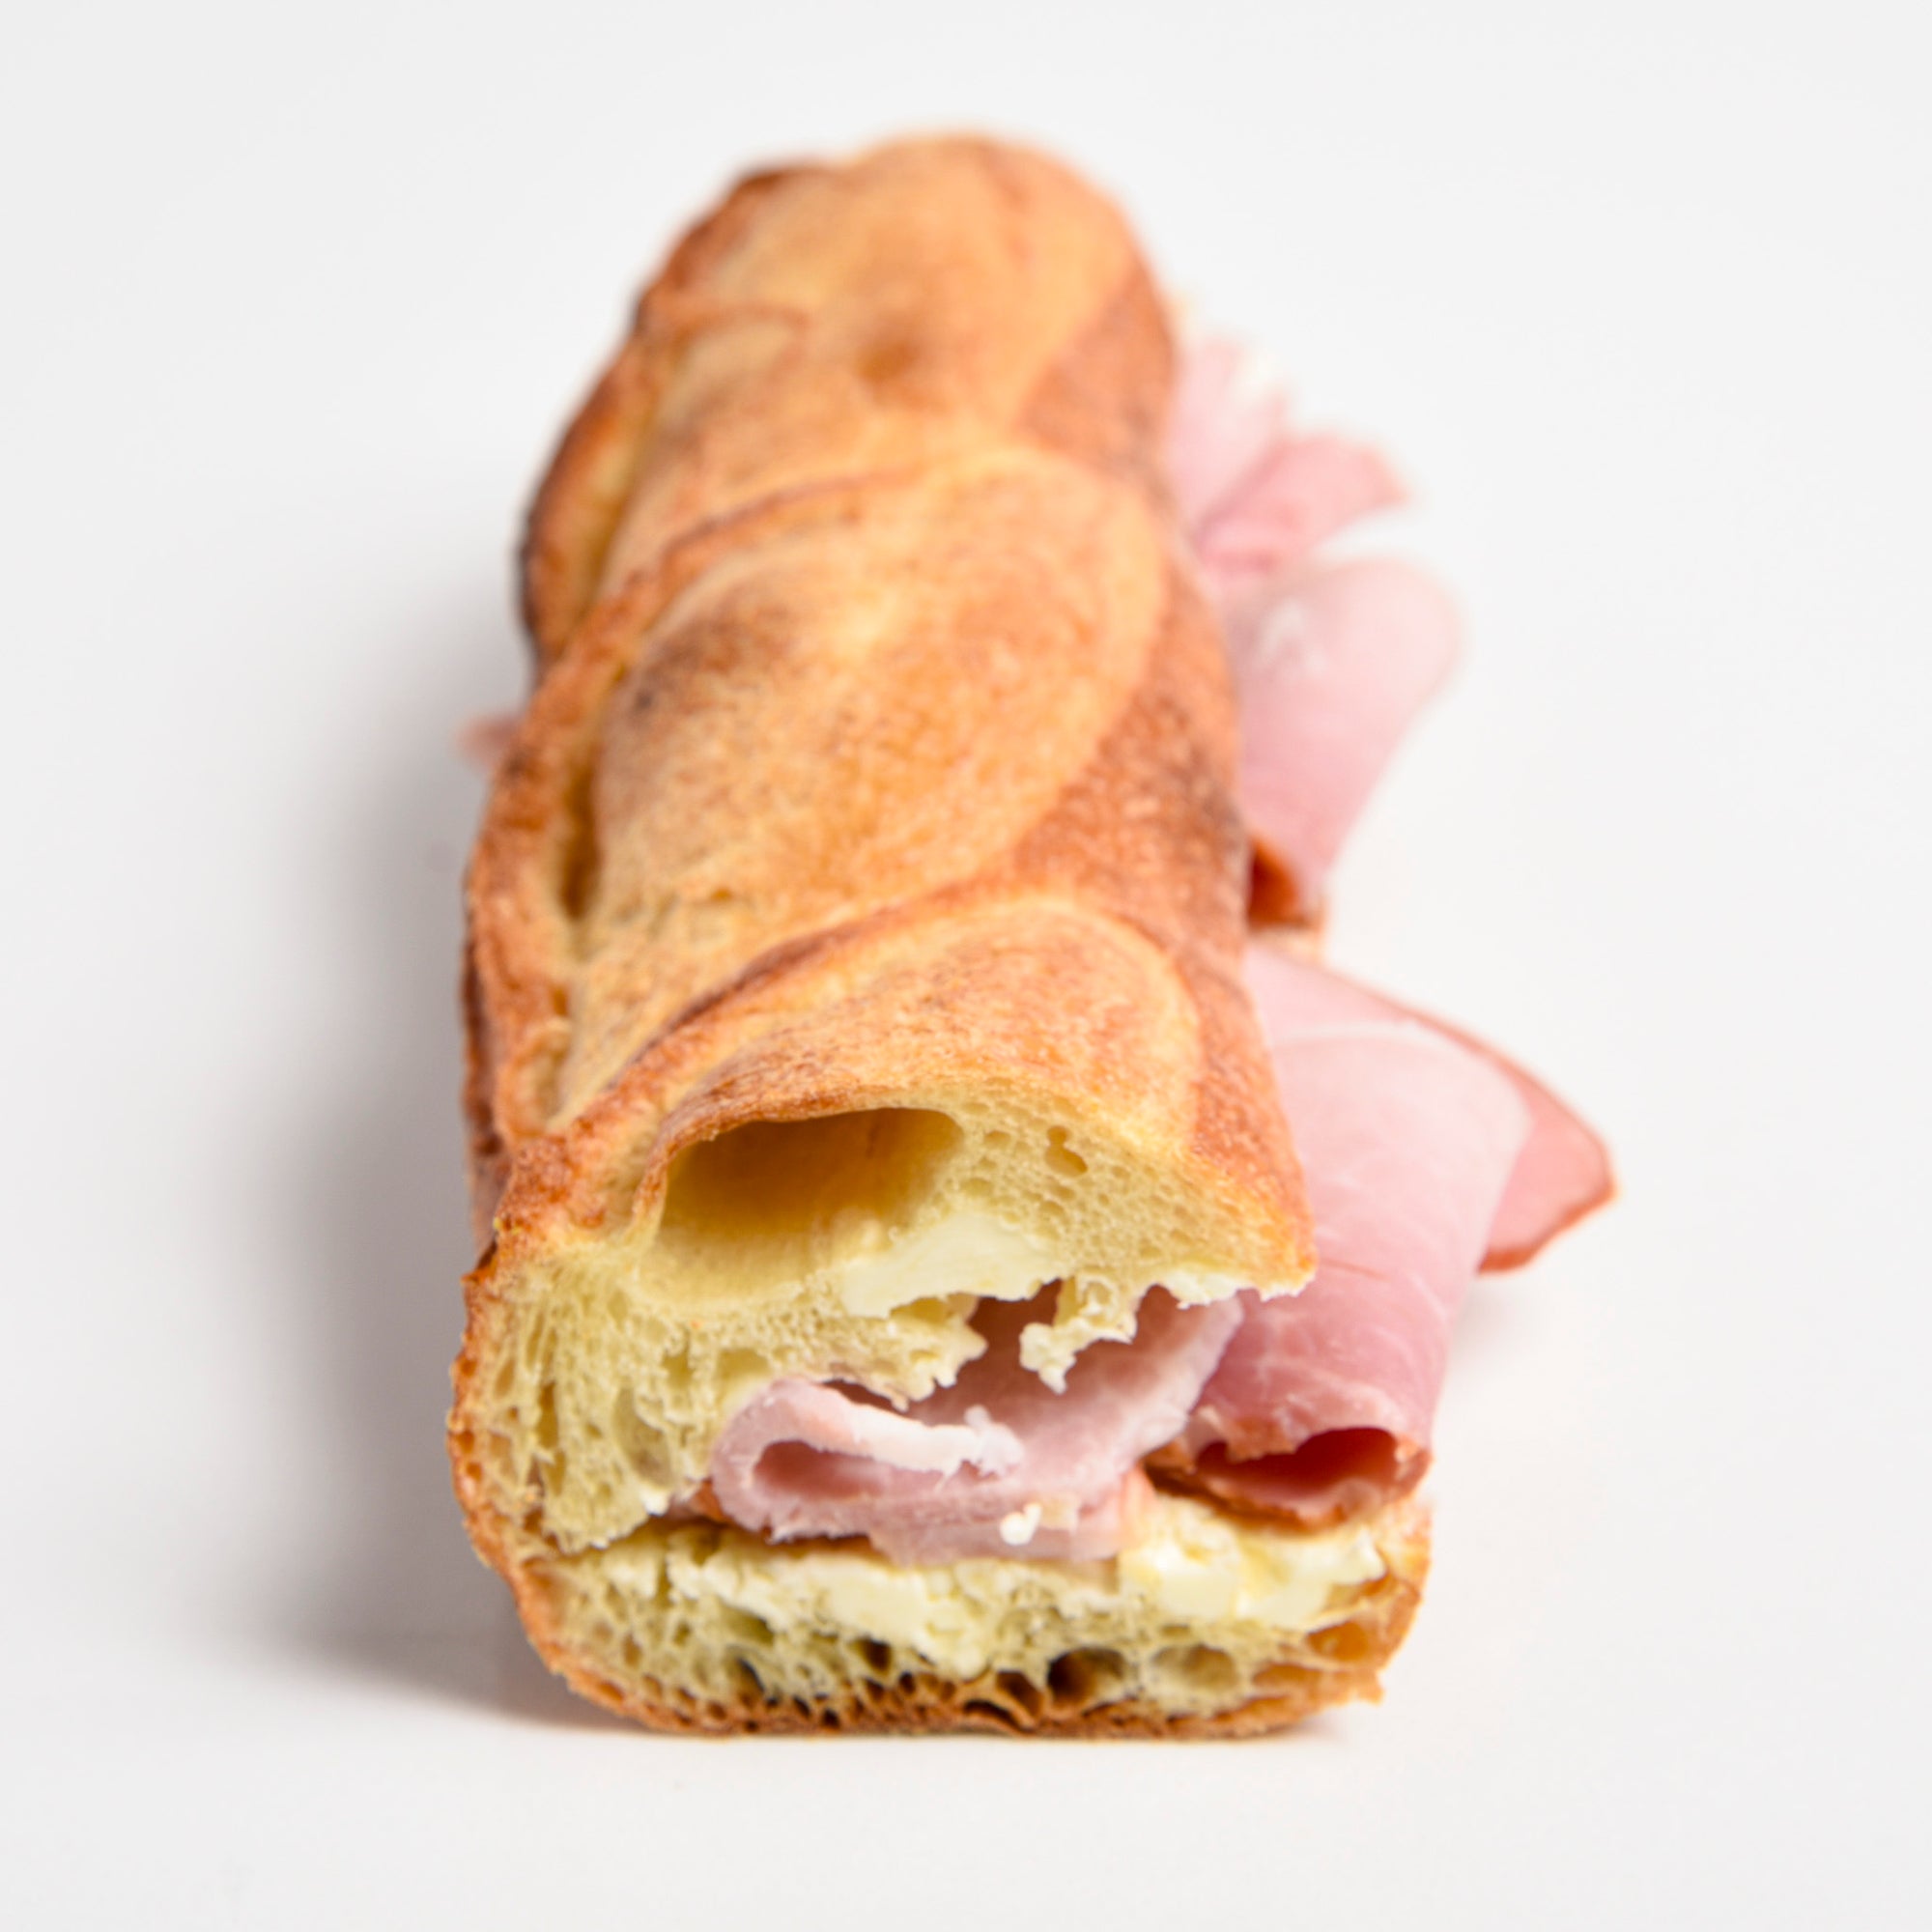 Close up of Le fournil bakery sandwich jambon beurre classic French ham with salted butter baguette